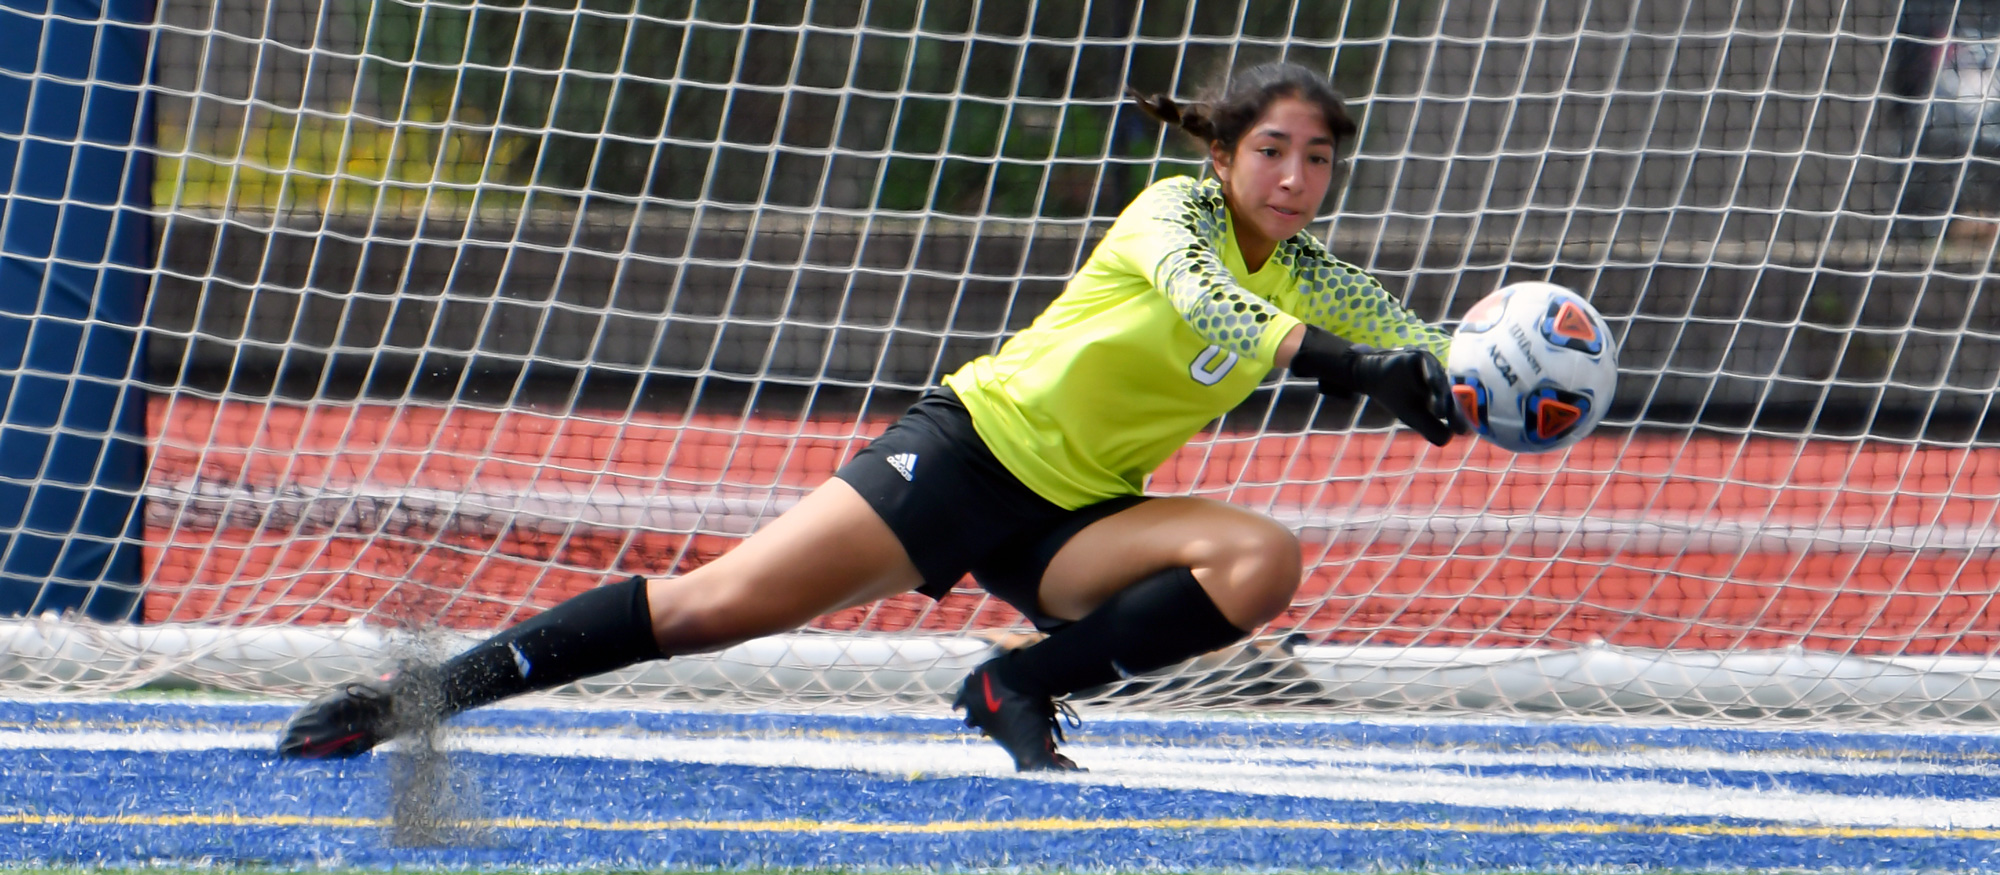 Clarissa Govea made seven saves in her first collegiate shutout, as Mount Holyoke defeated Colby-Sawyer 1-0 on Sept. 7, 2022. (RJB Sports file photo)